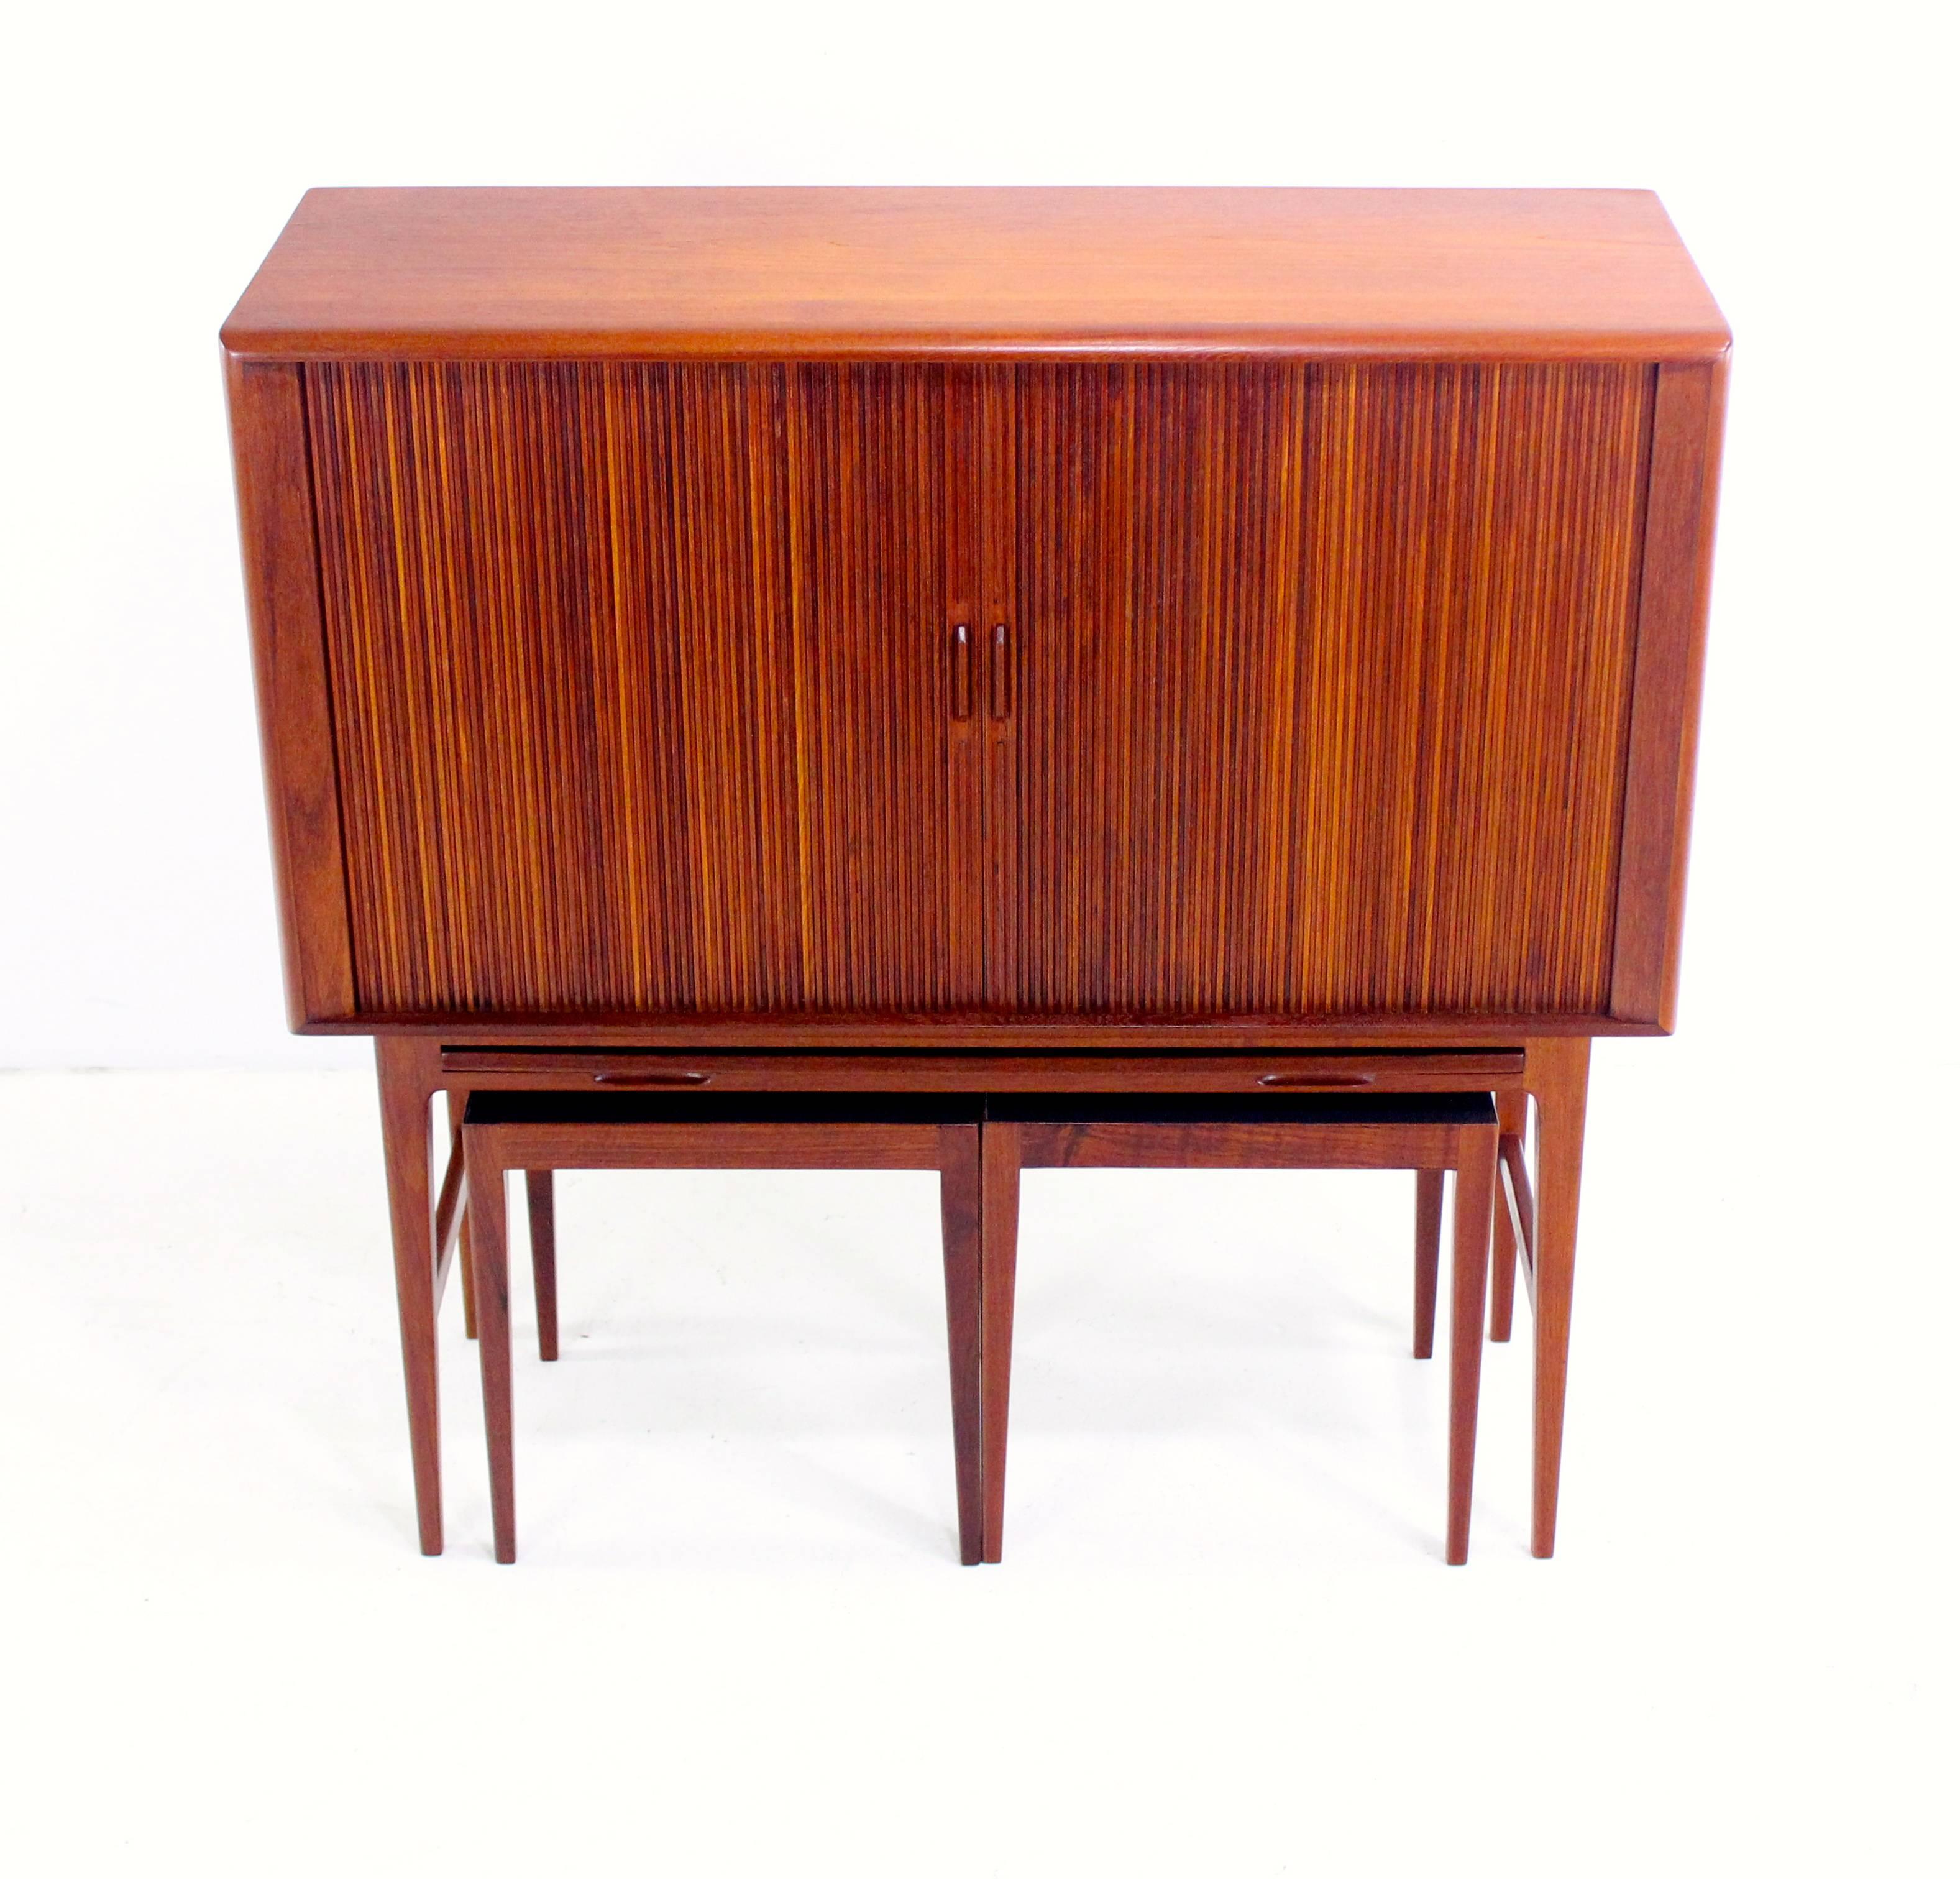 20th Century Exceptional Danish Modern Teak Bar Cabinet with Tambour Doors by Kurt Ostervig For Sale